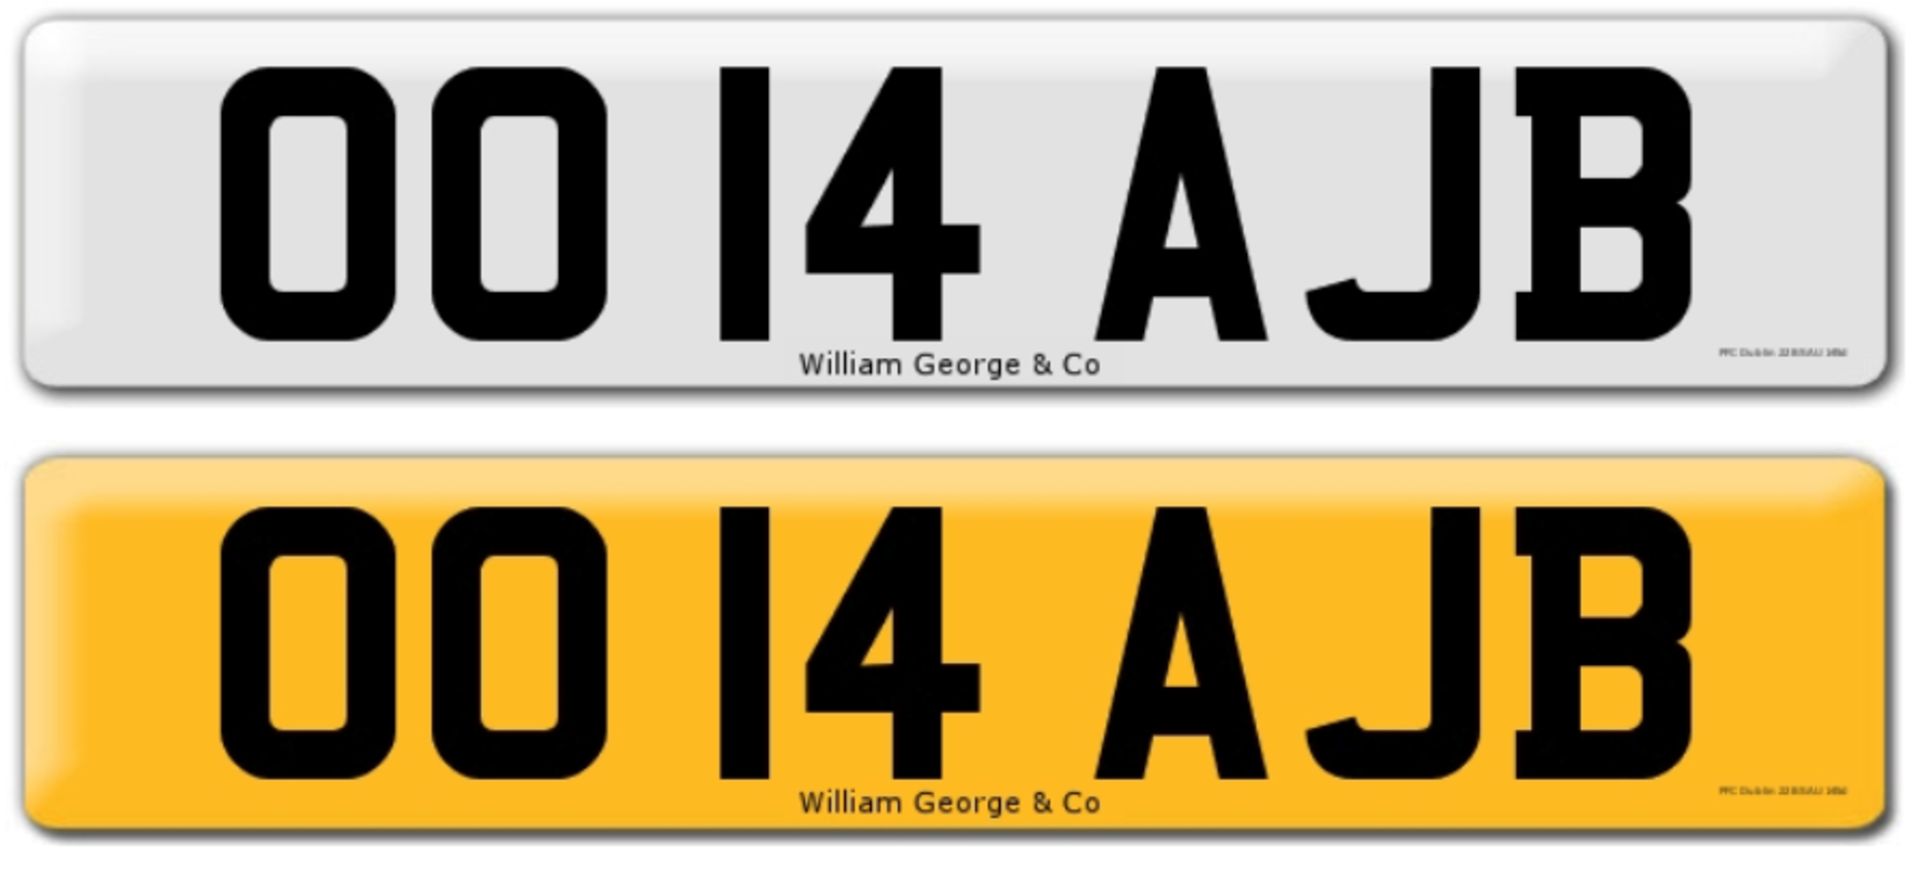 Registration on DVLA retention certificate, ready to transfer OO 14 AJB This number plate /